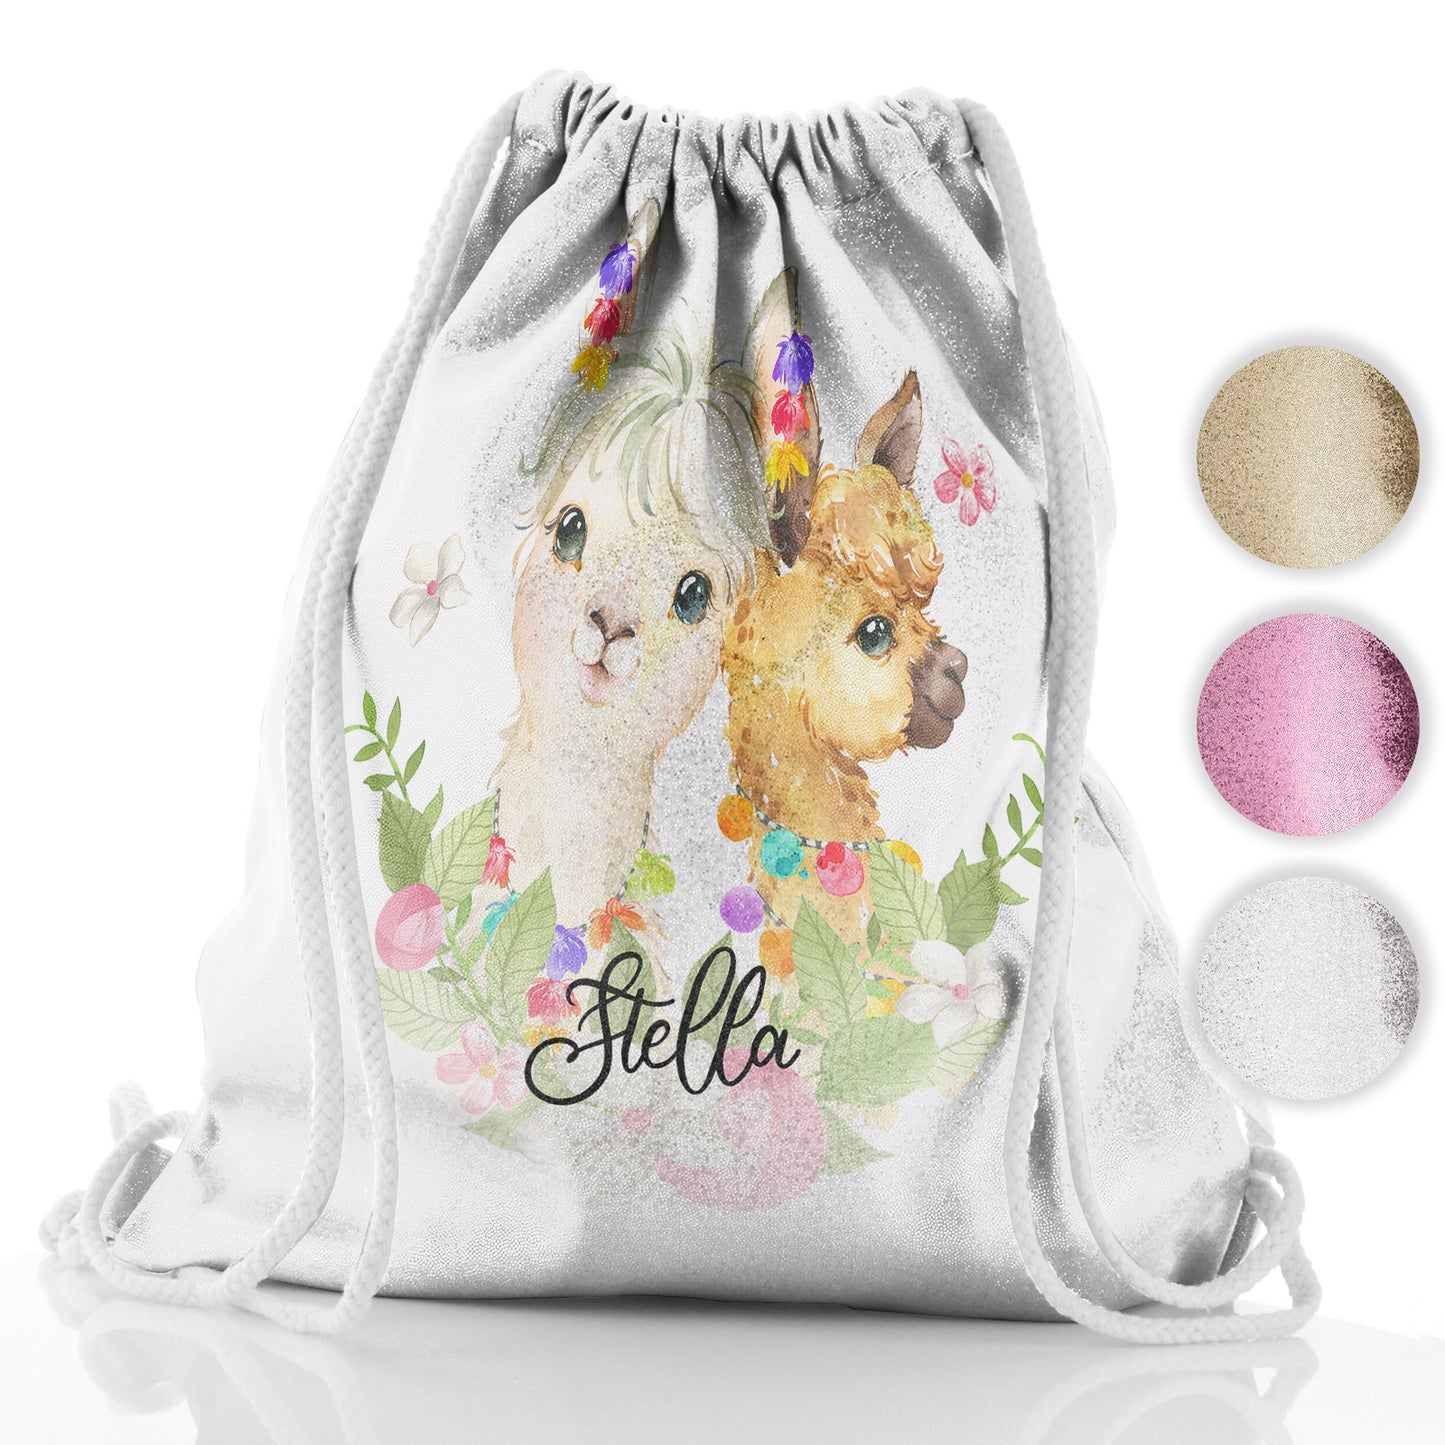 Personalised Glitter Drawstring Backpack with Alpacas Multicolour Baubles and Cute Text